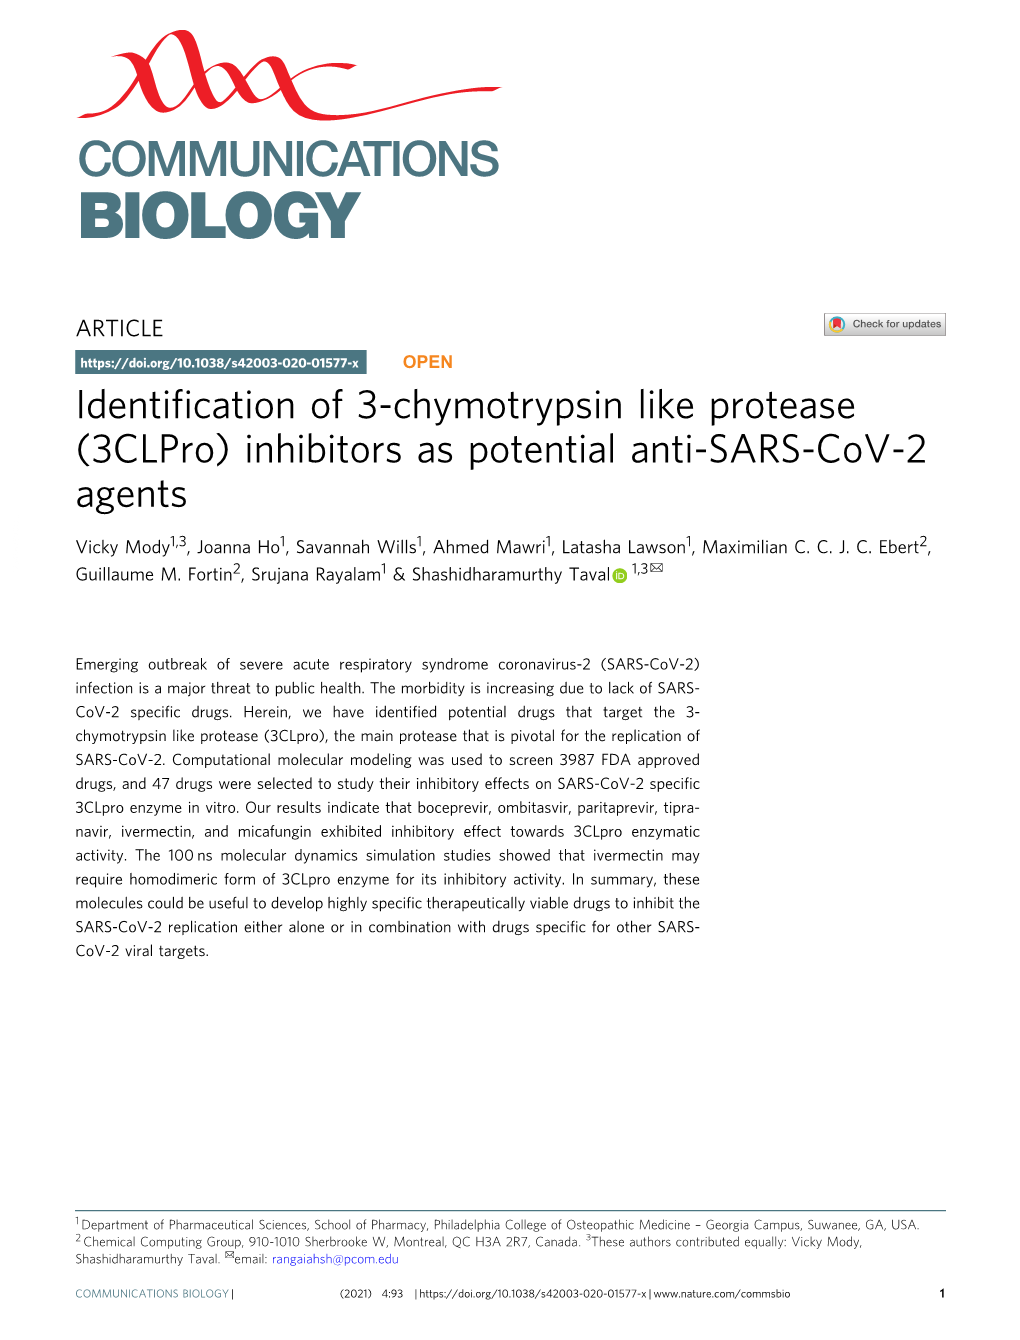 Identification of 3-Chymotrypsin Like Protease (3Clpro)